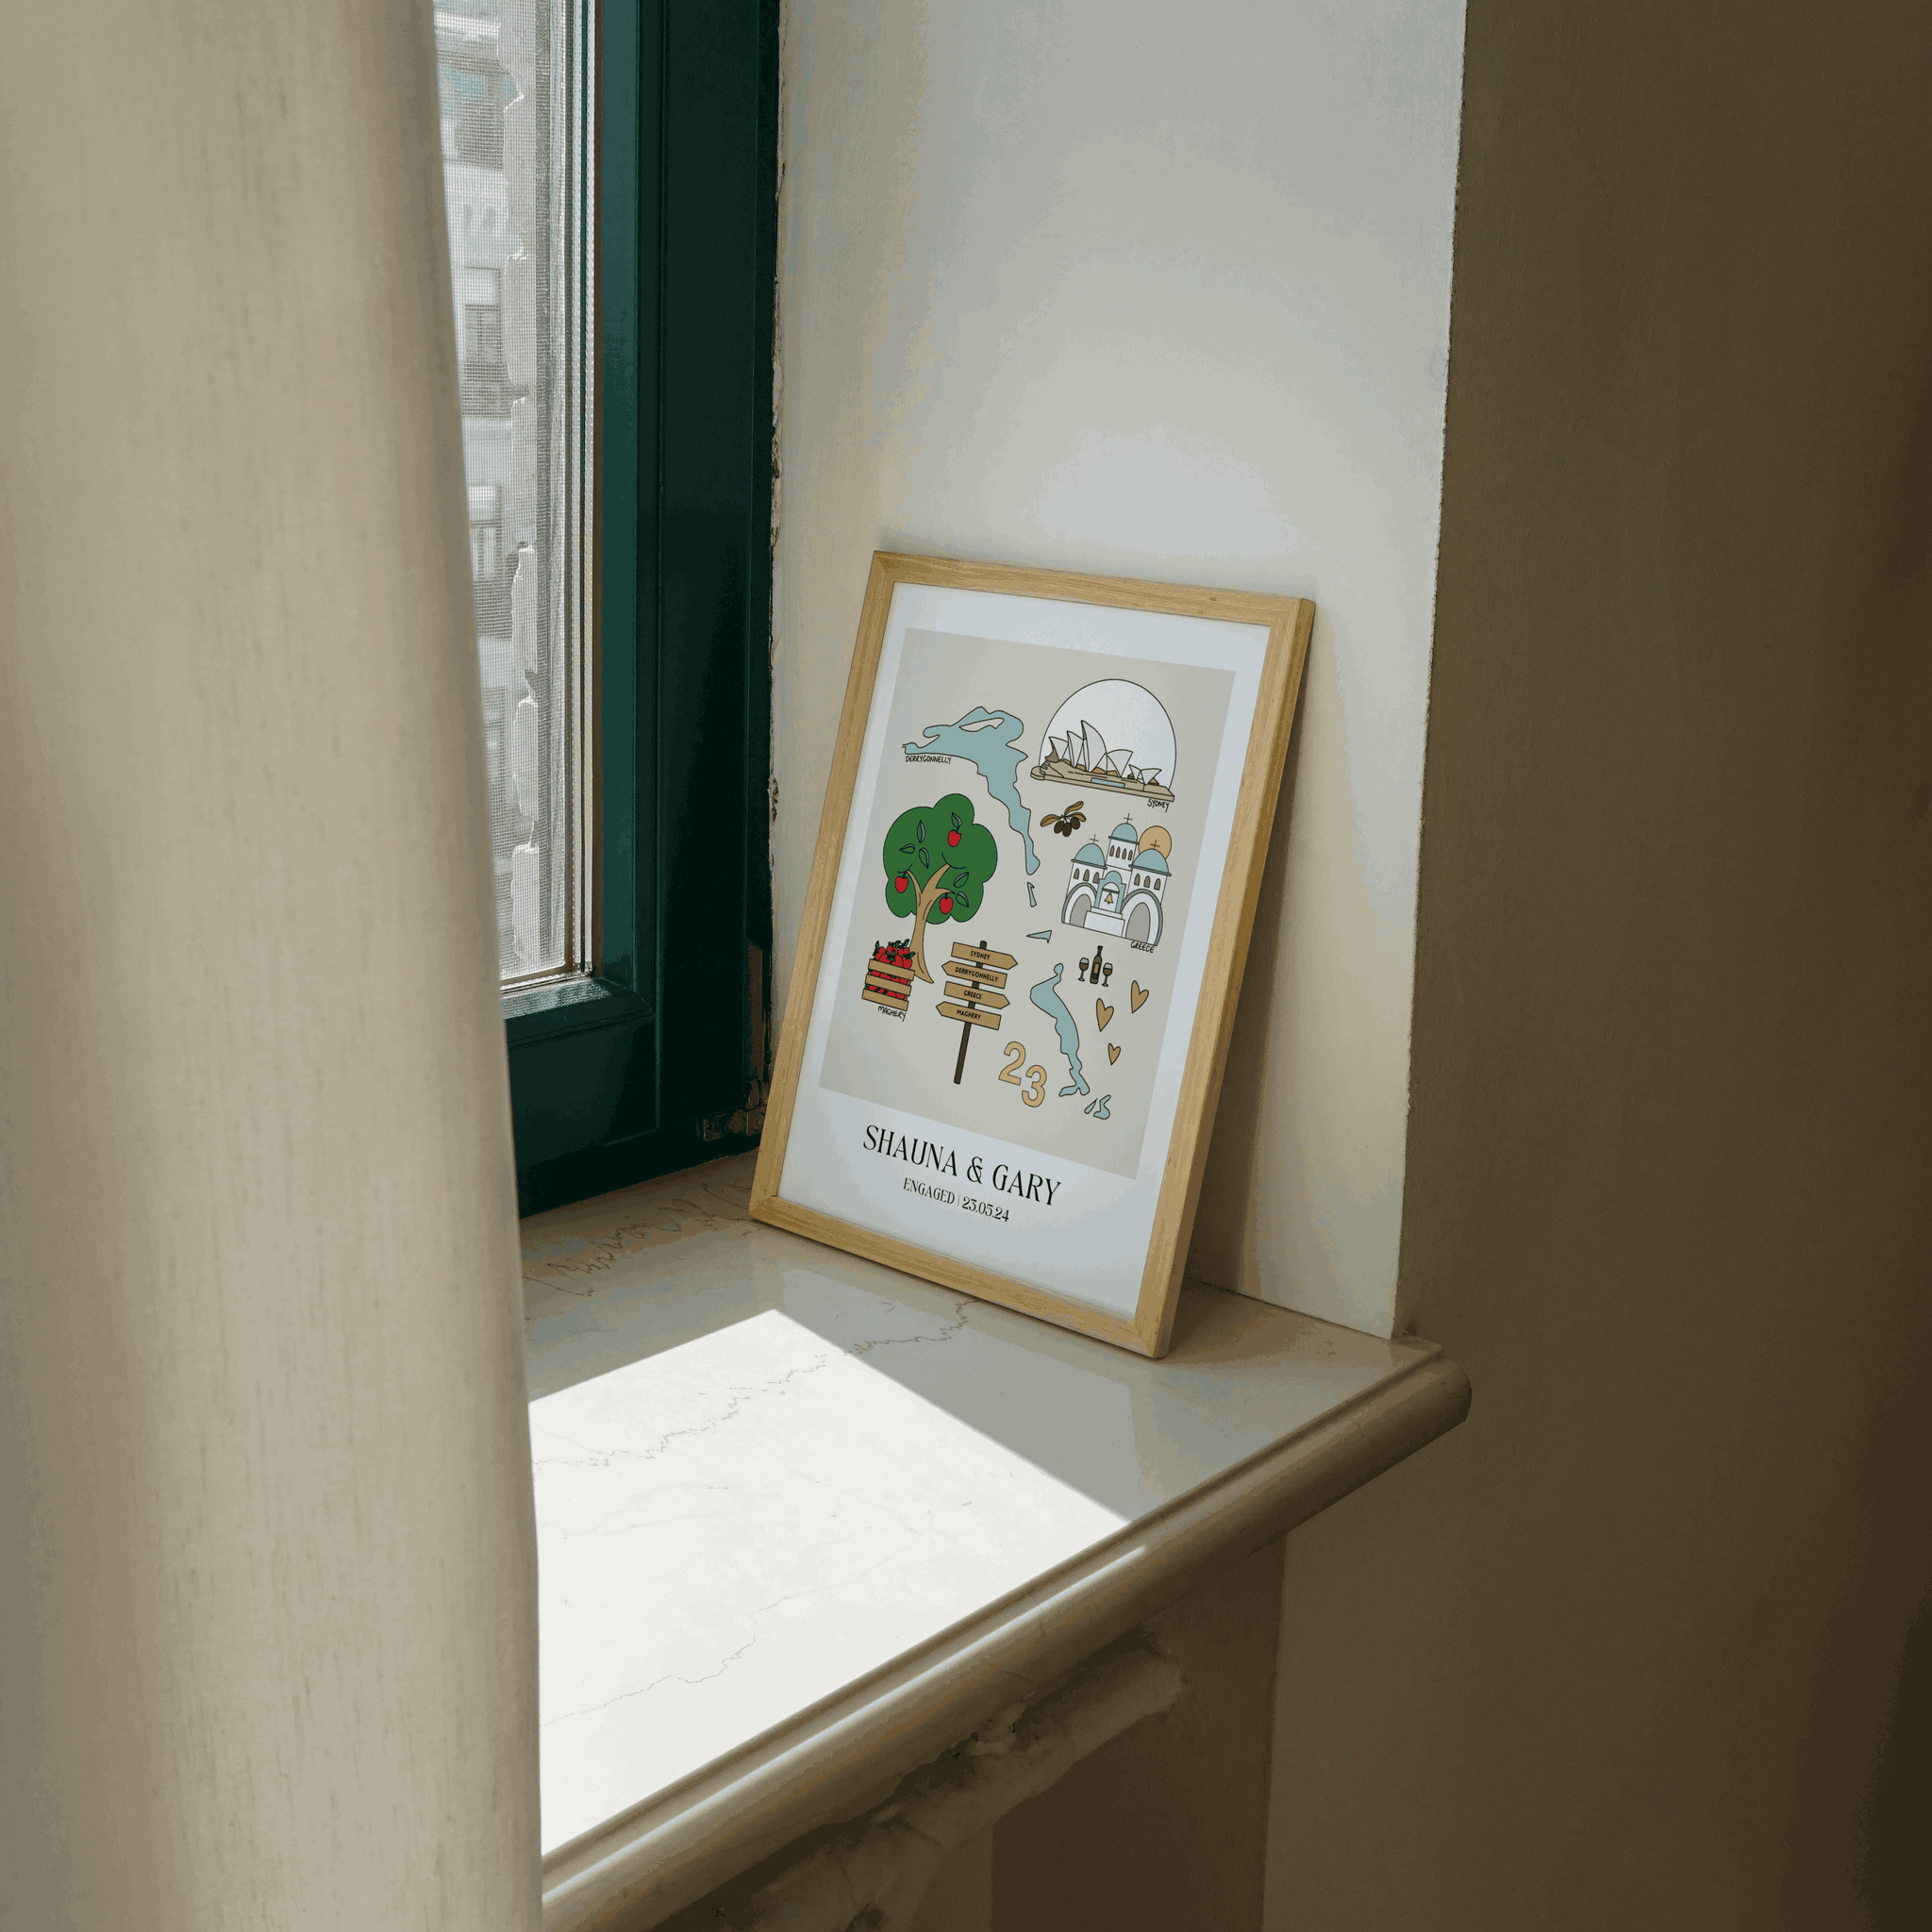 Custom engagement illustration print example 2 framed in a window sill